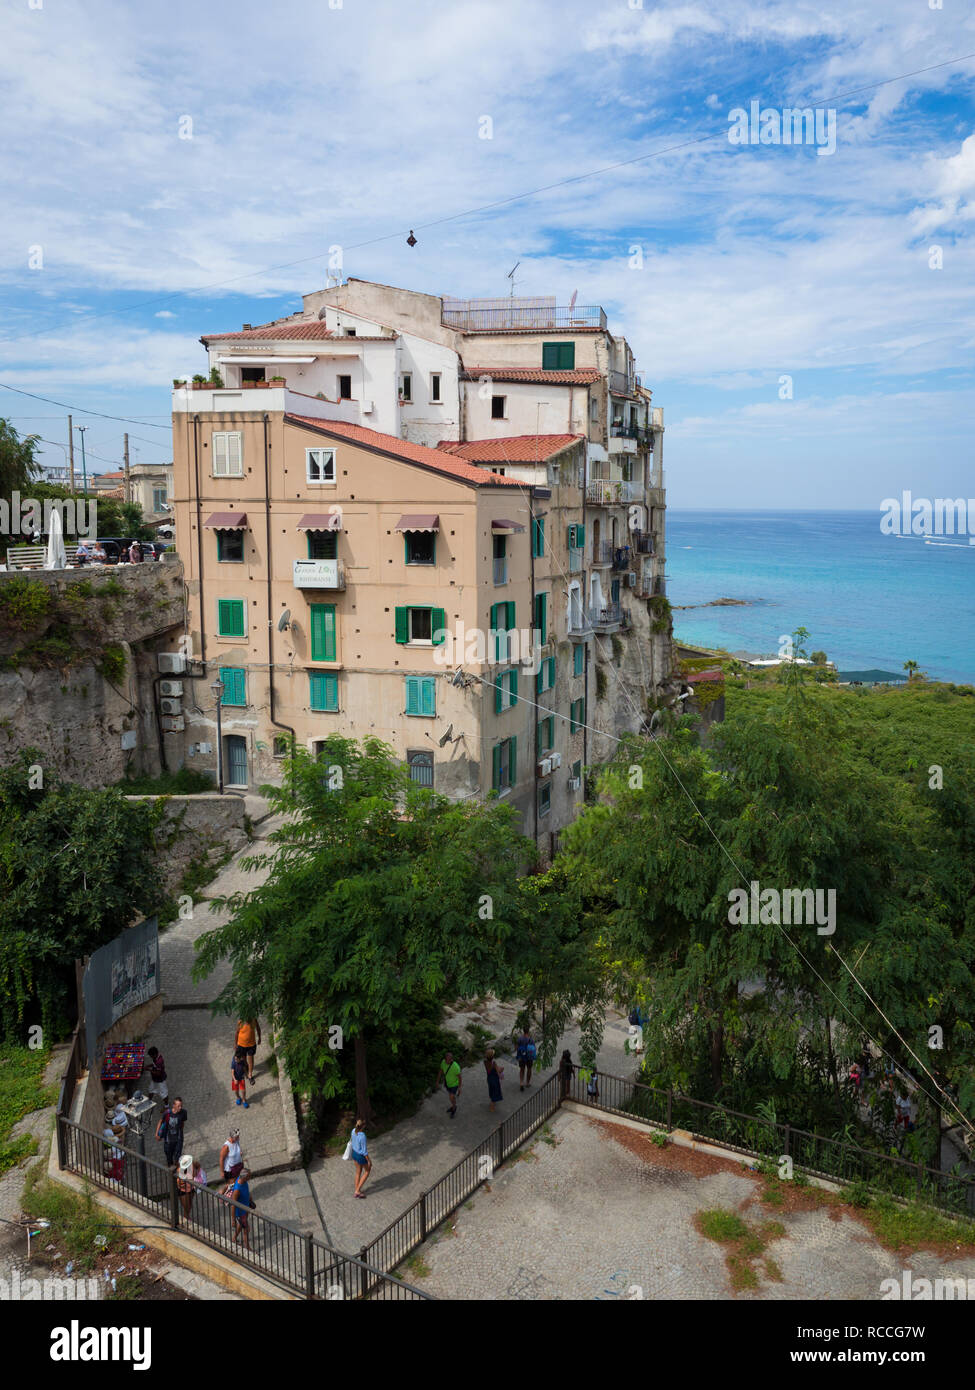 Tropea, Italy - August 21, 2018: View of Tropea, a tourist resort in southern Italy perched on a cliff overlooking the sea. Stock Photo